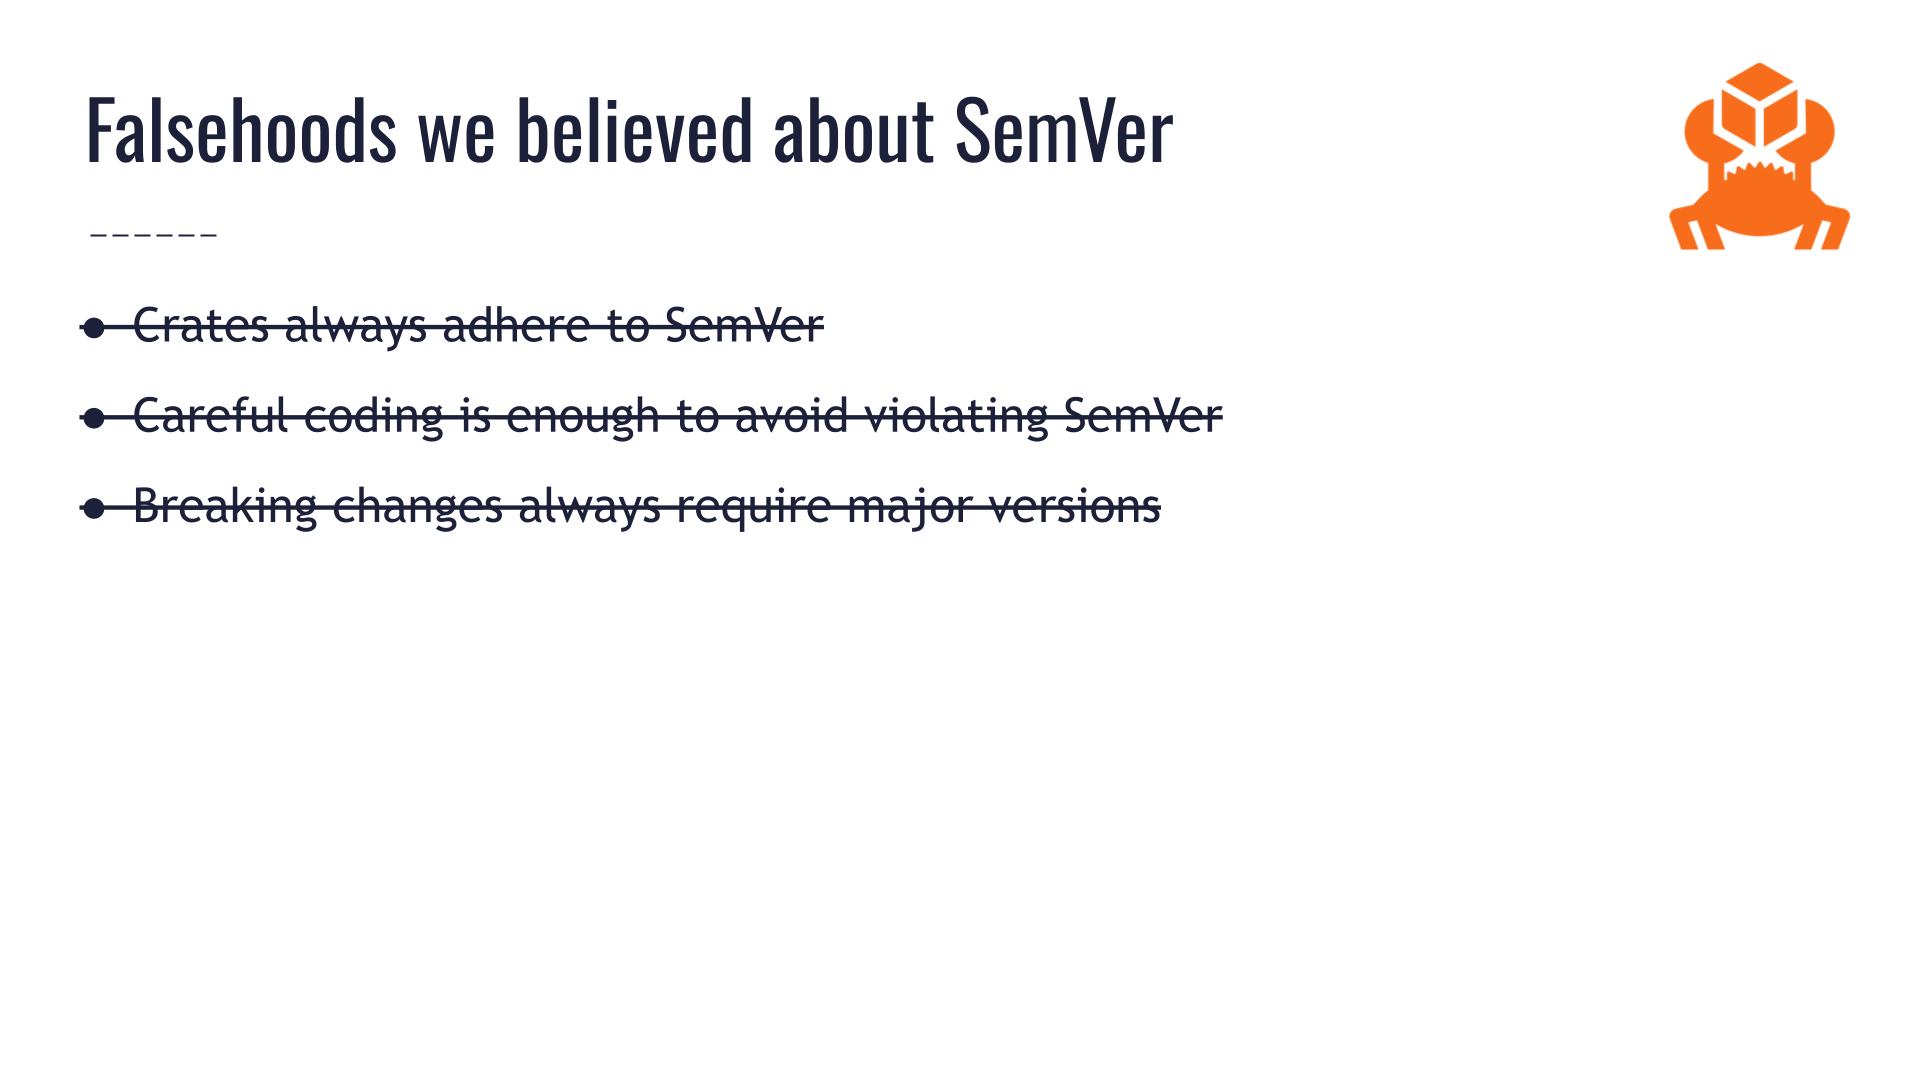 The same slide titled "Falsehoods we believed about SemVer" from earlier. All three bullet points shown so far are crossed off: "crates always adhere to SemVer" / "careful coding is enough to avoid violating SemVer" / "breaking changes always require major versions." There is still plenty of blank space left where more items can be added to the list.